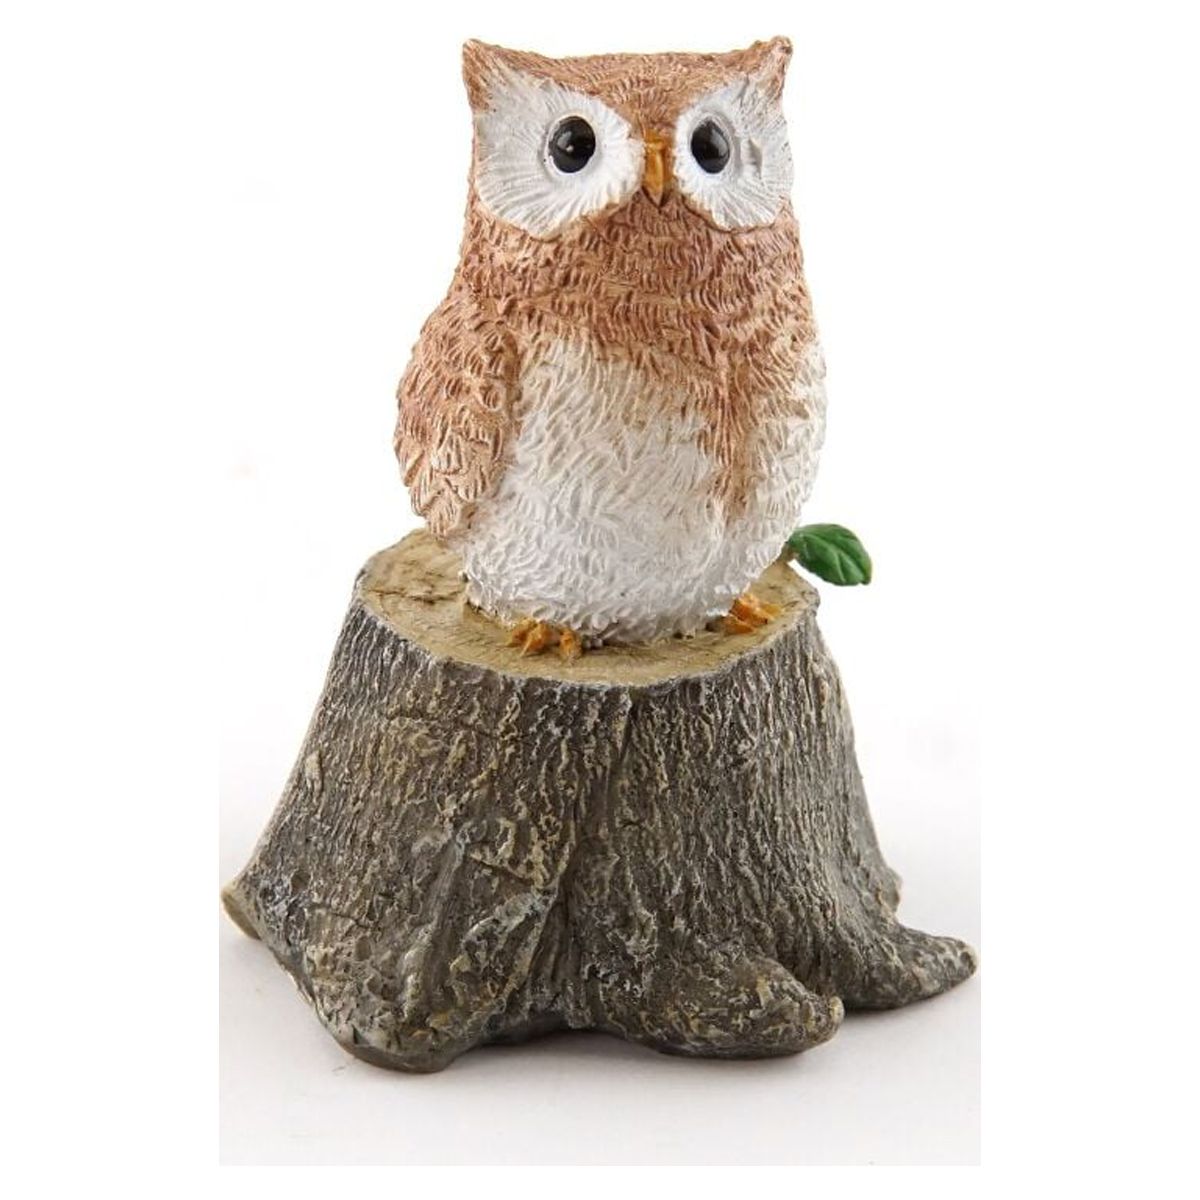 Top Collections Miniature Garden Owl Statues (Little Owl on Tree Stump) - image 1 of 2